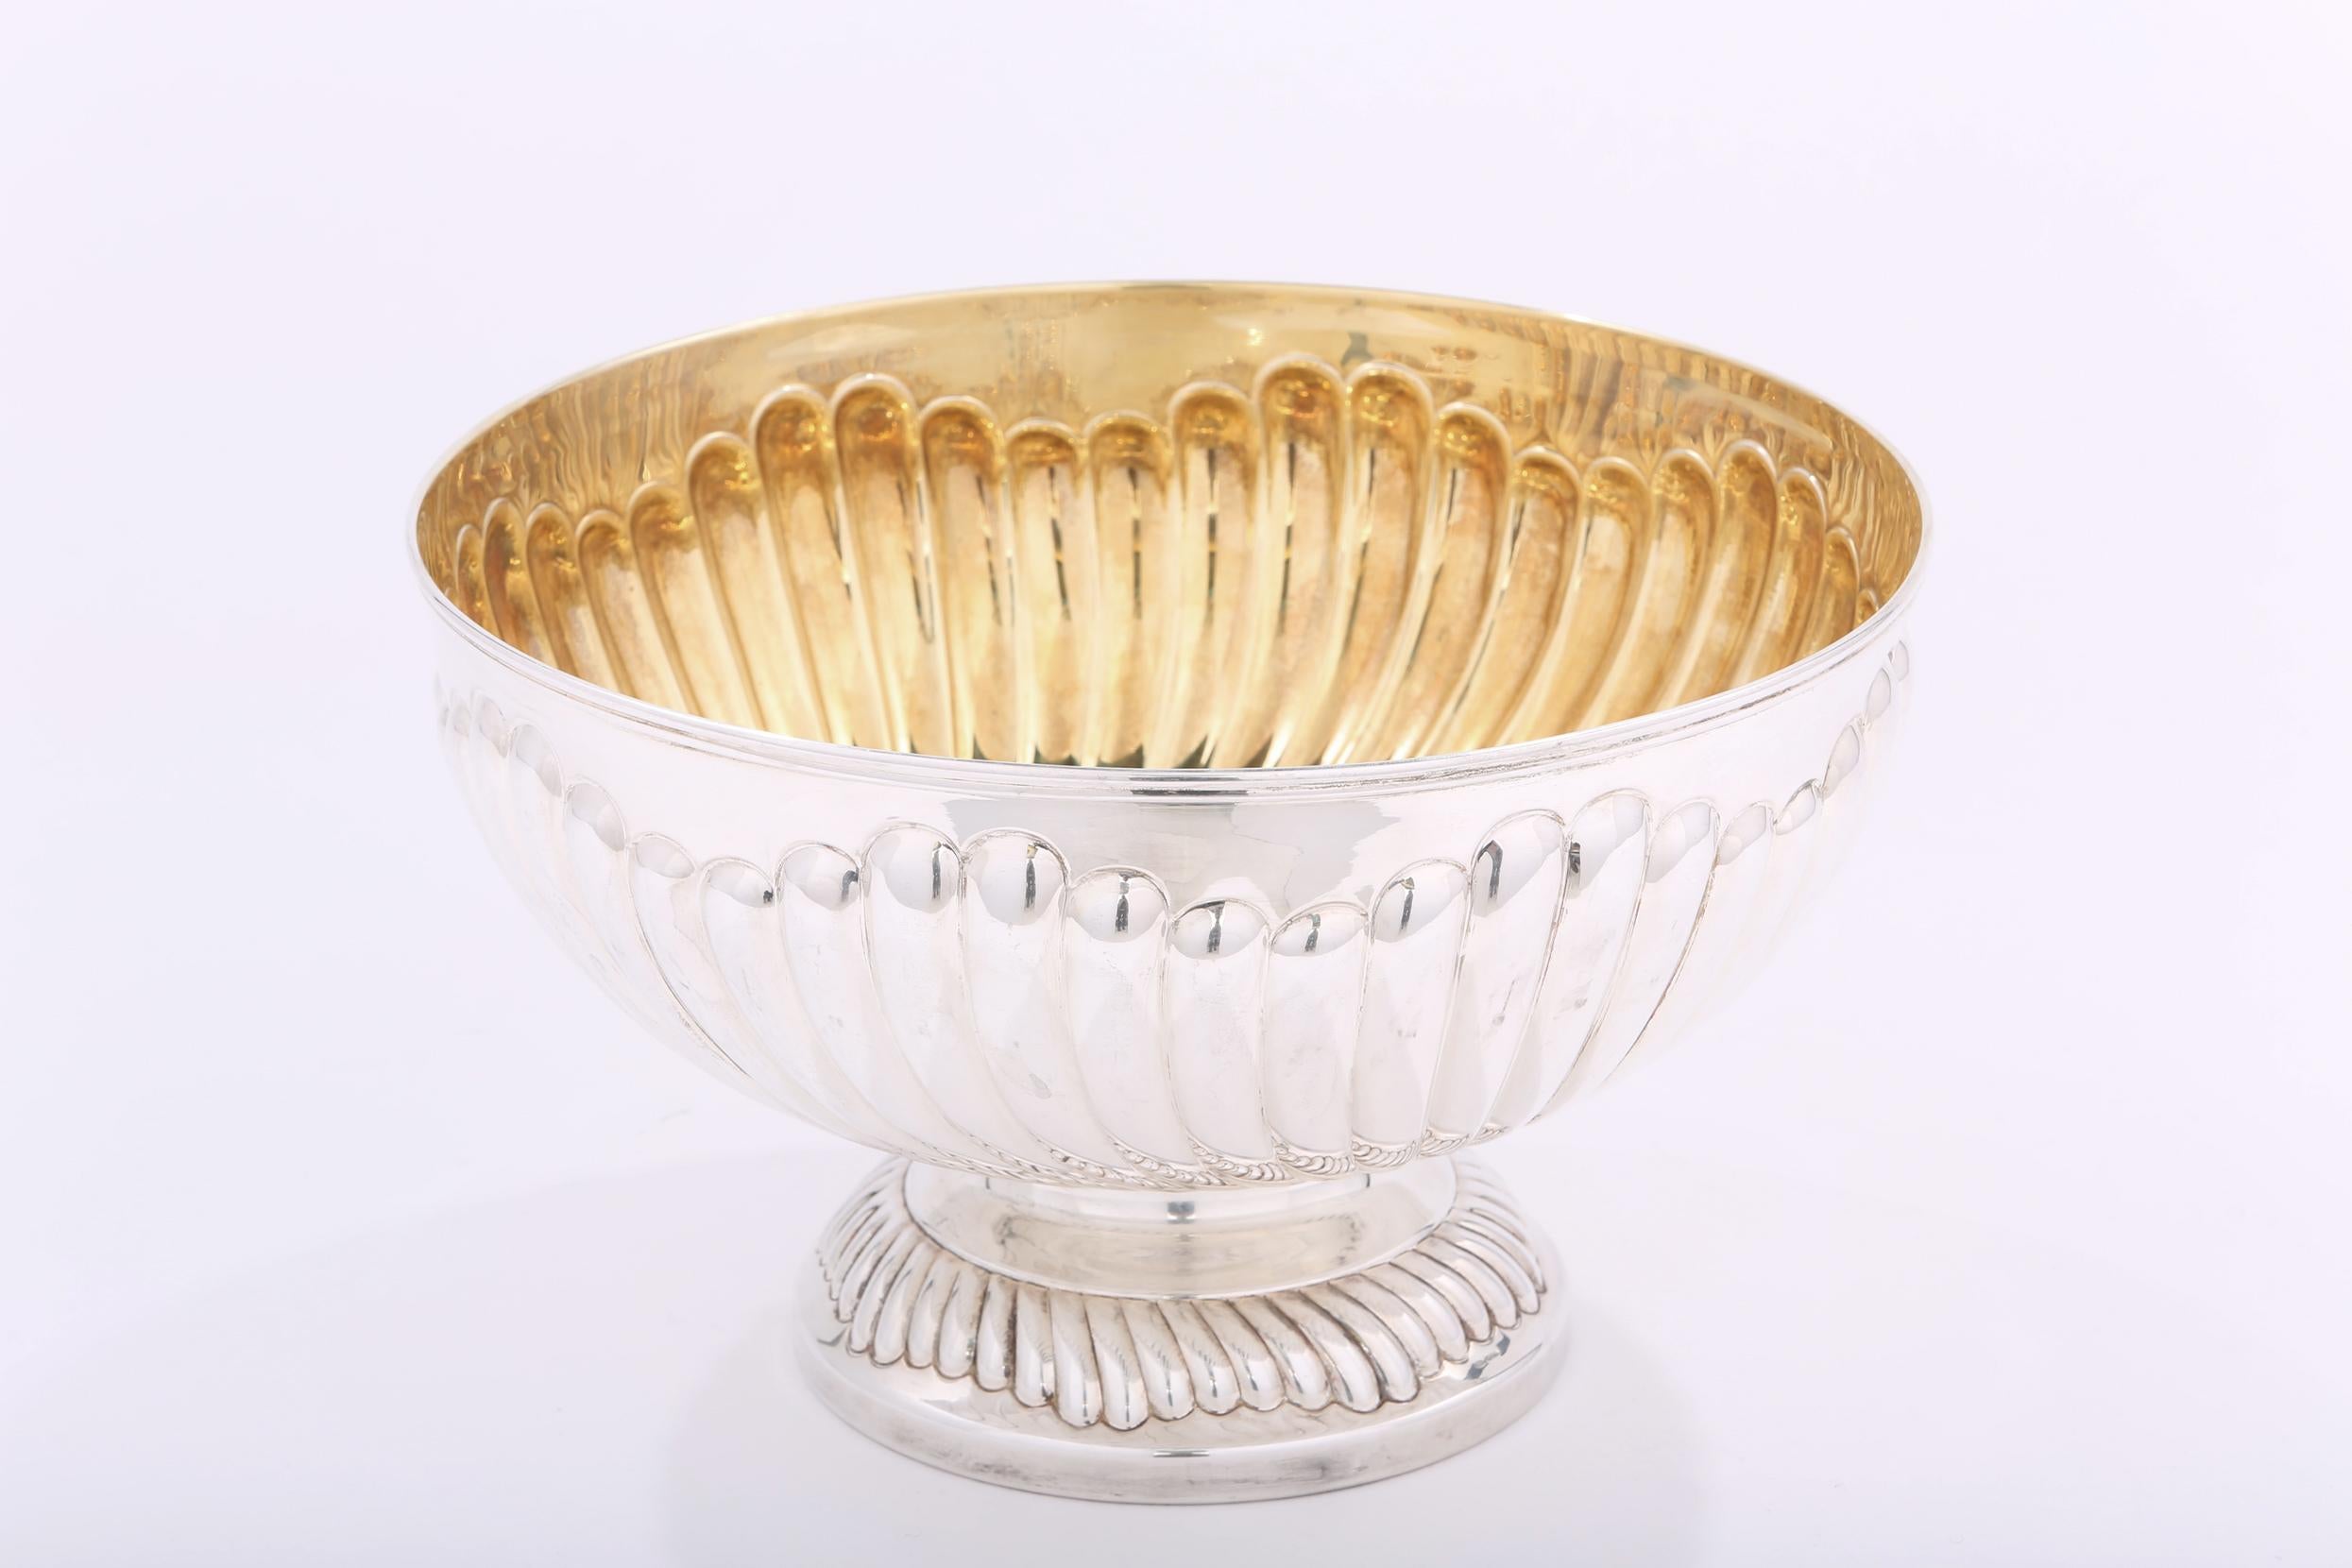 Large Italian sterling silver footed centerpiece bowl with gold washed interior and ribbed design. The bowl is in great condition. Maker's mark 800 silver .  Minor wear consistent with age / use. The bowl stands about 7.3 inches high X 12 inches